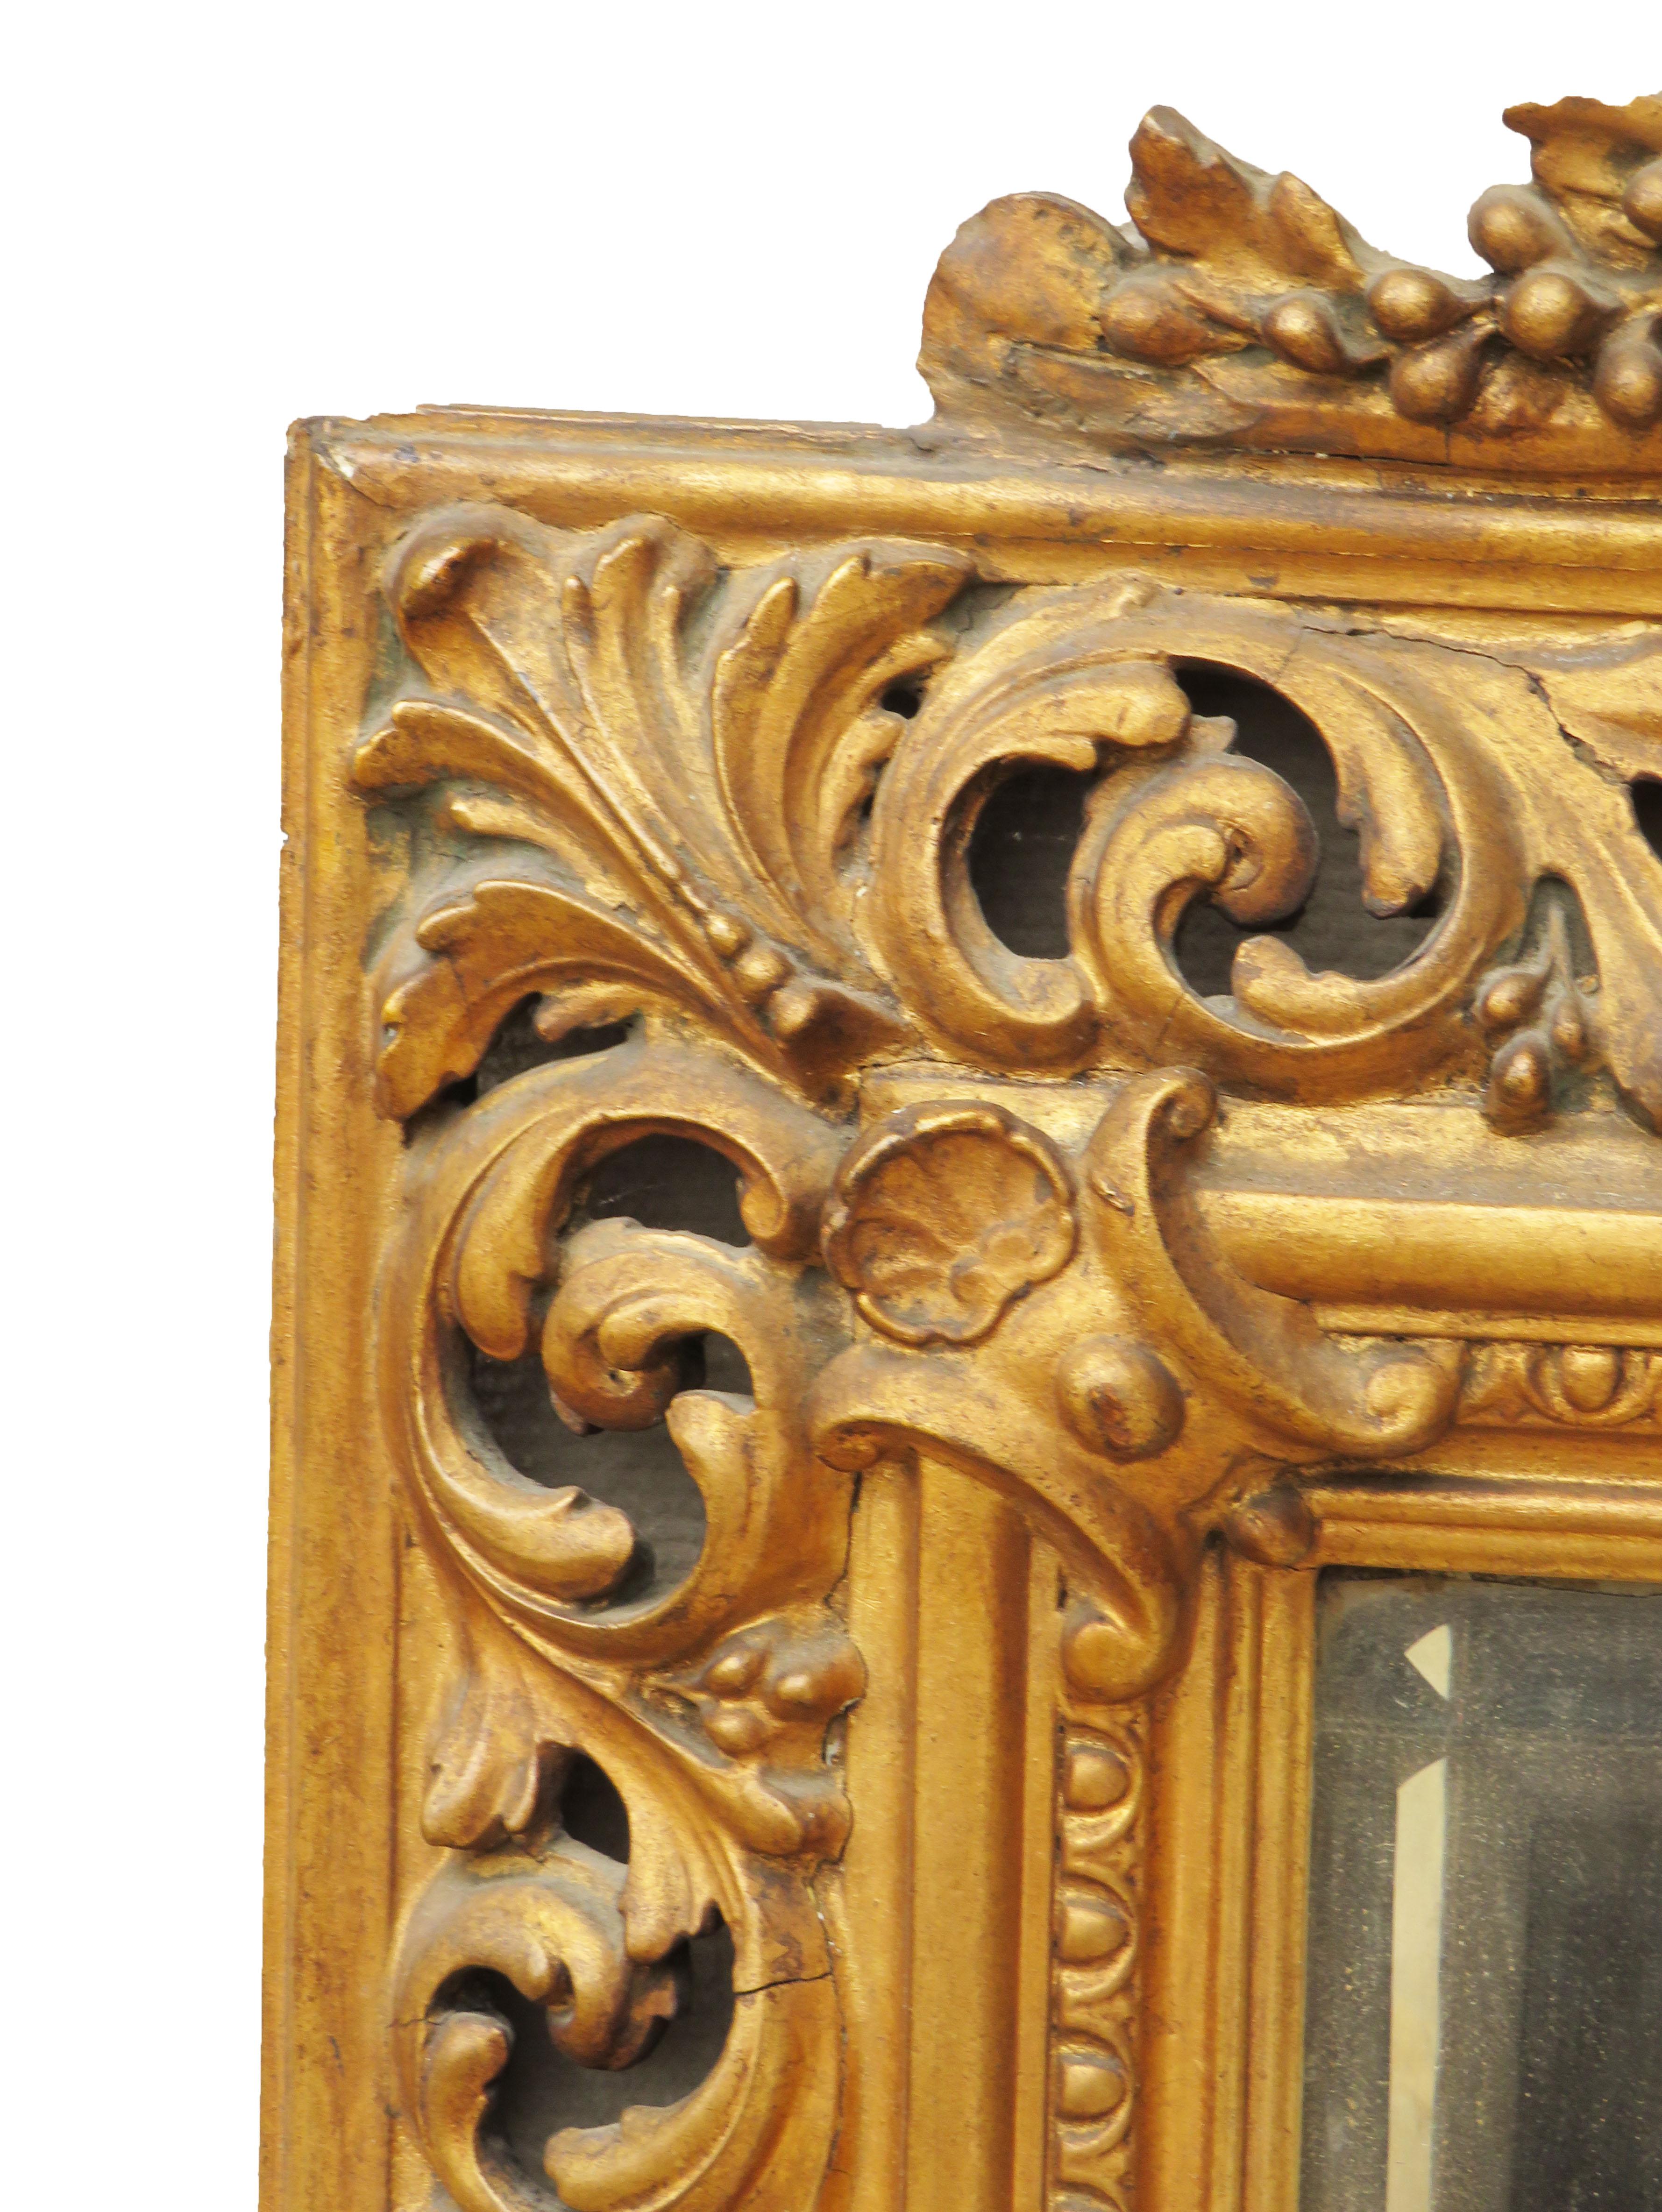 A very attractive mid-19th century giltwood and gesso
wall mirror having carved surmount over pierced
Frame bordering replacement beveled mirror plate

(This mirror would of been made during the mid-19th century
in Italy. It is a typical